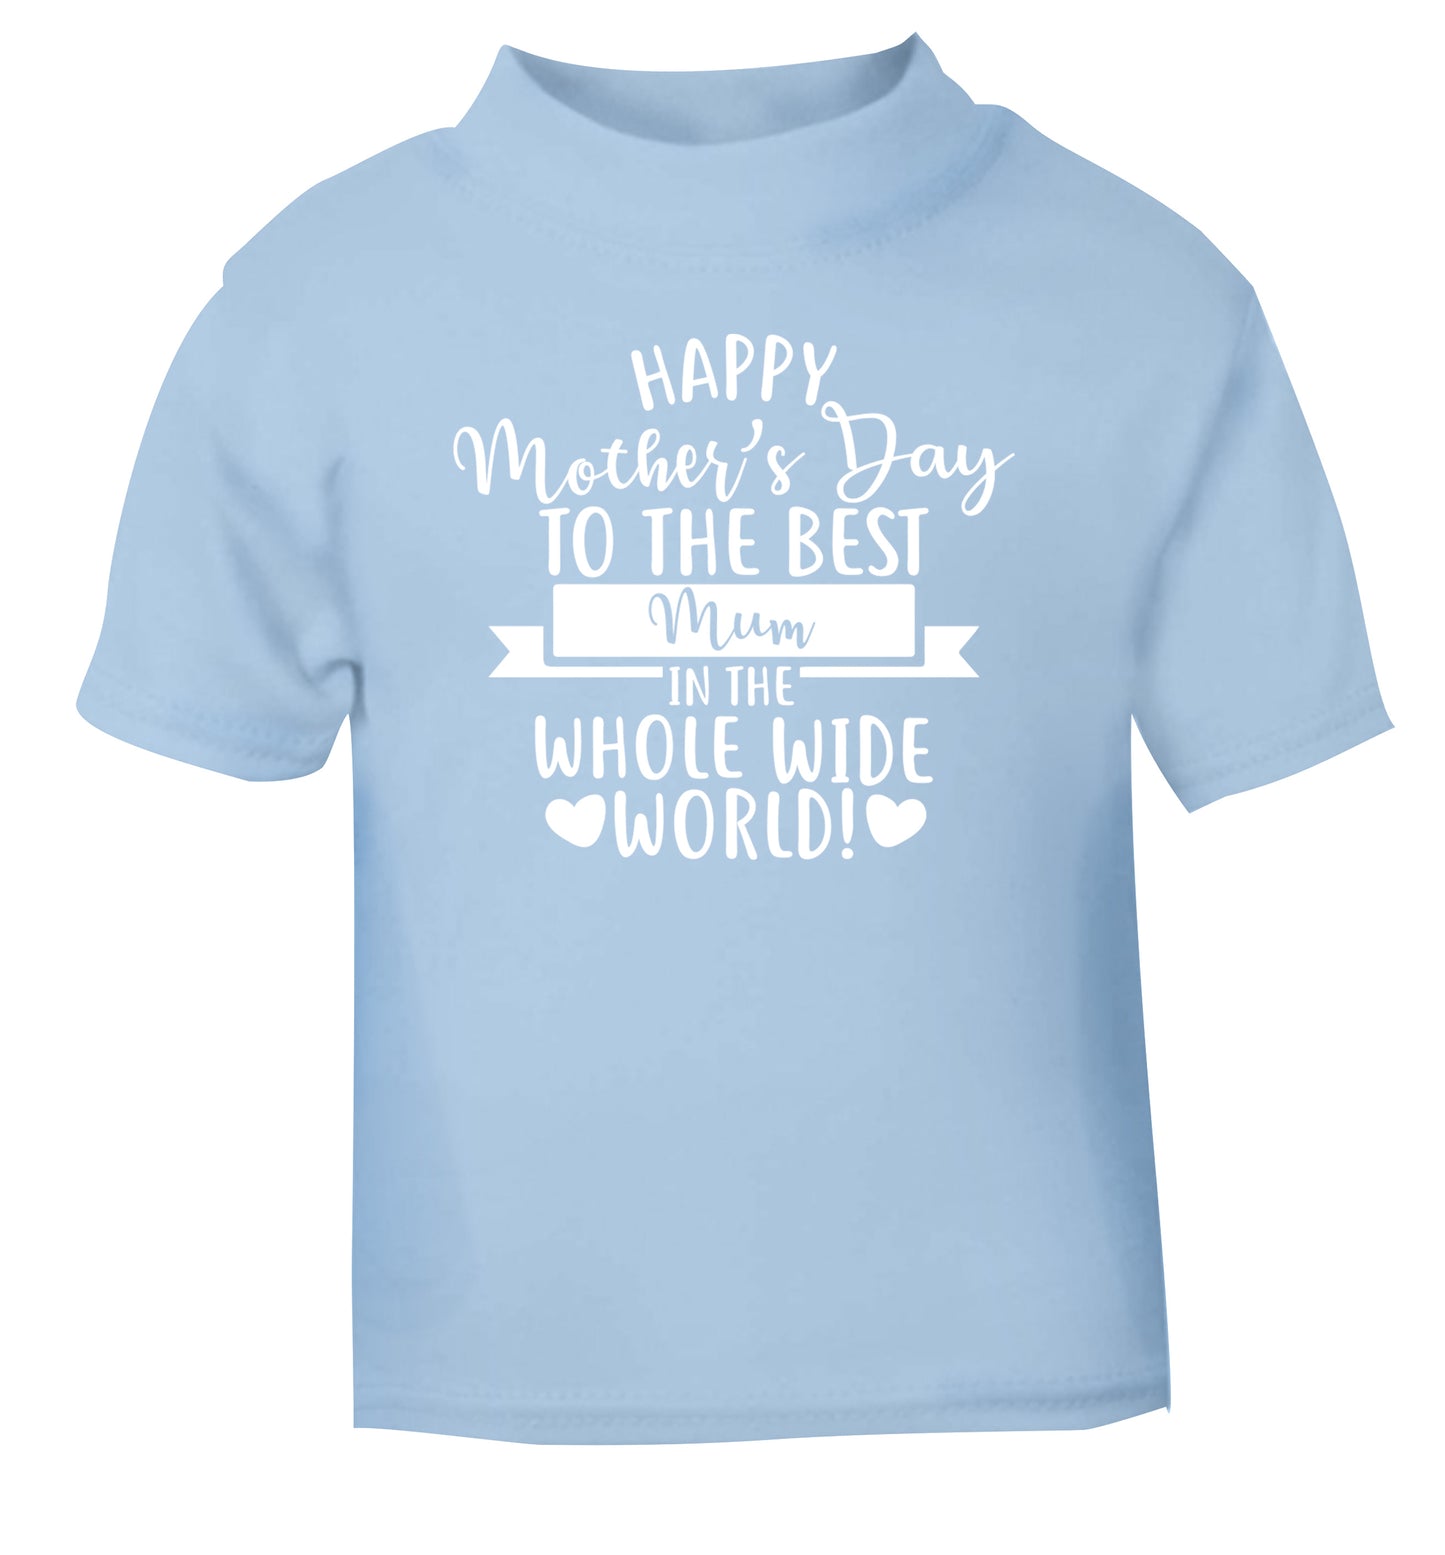 Happy Mother's Day to the best mum in the whole wide world! light blue Baby Toddler Tshirt 2 Years